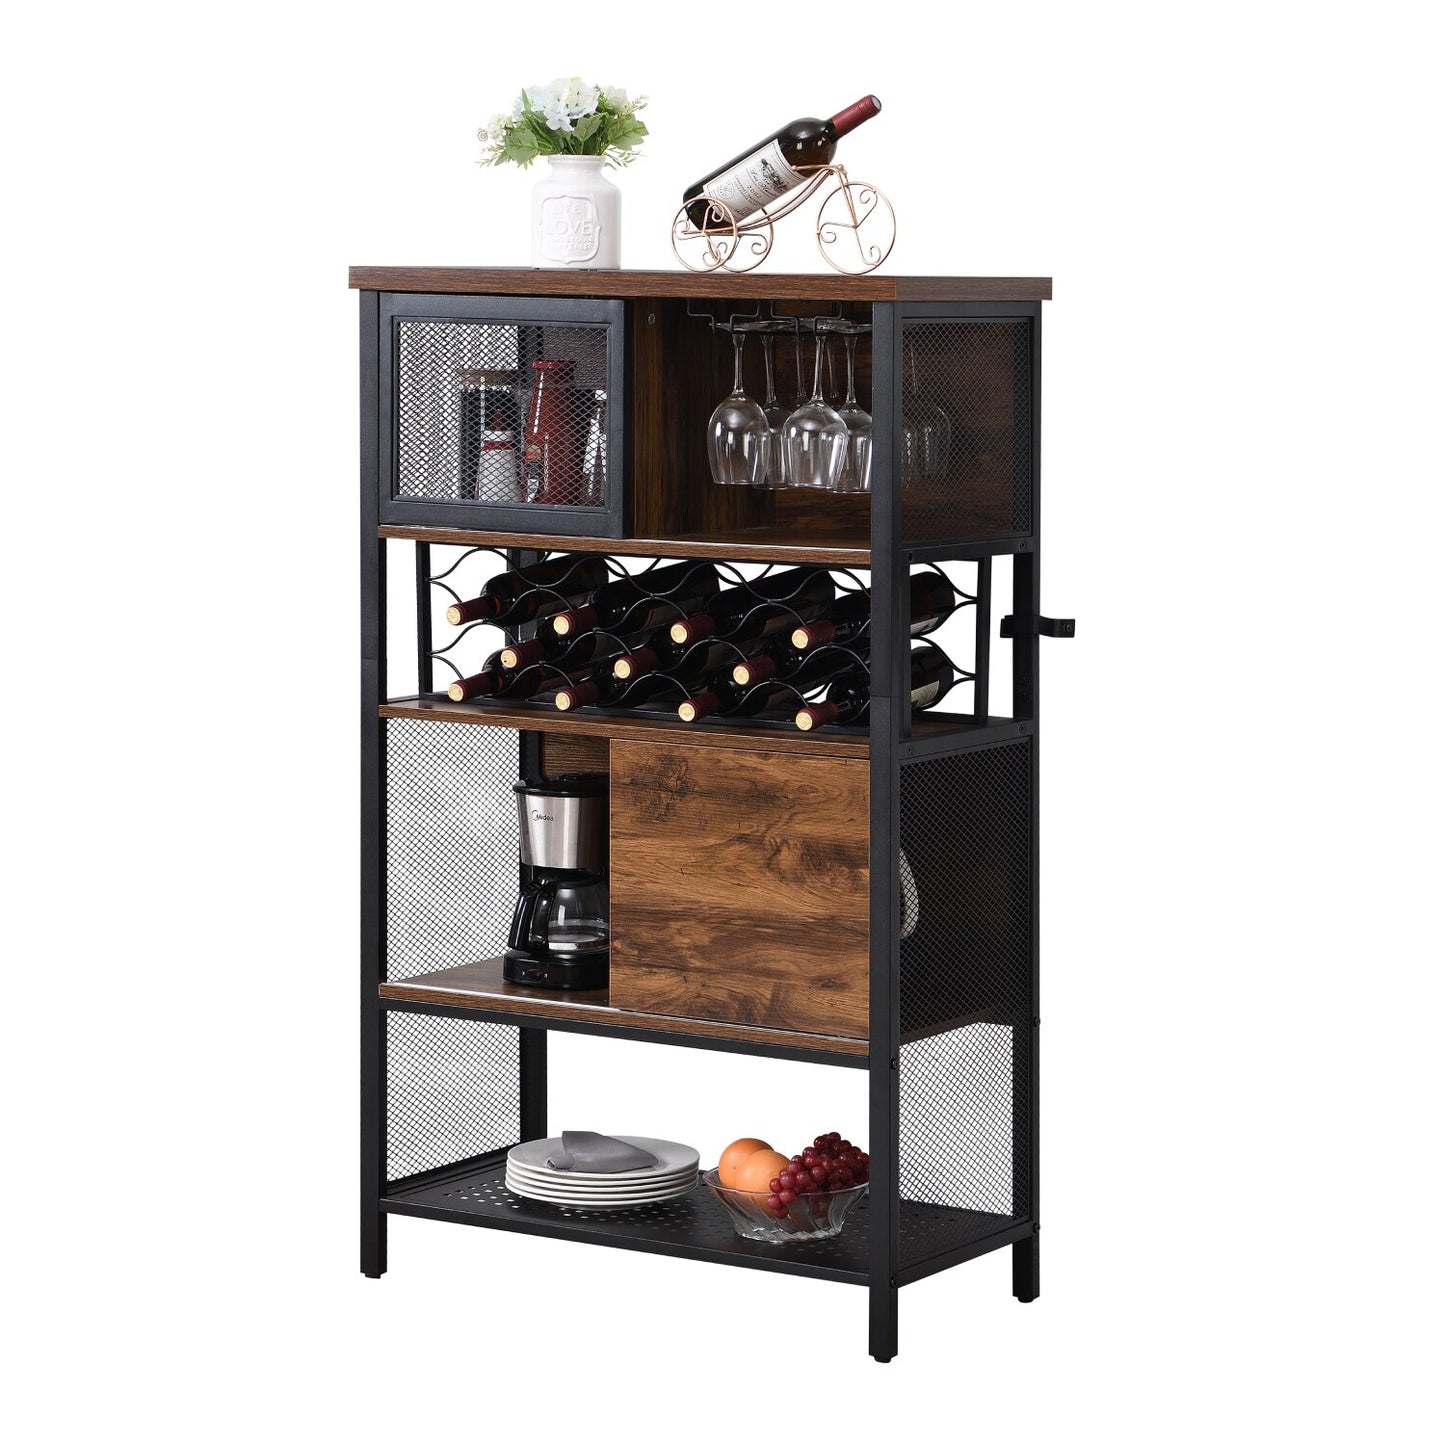 Industrial Bar Cabinet with Wine Rack - Holds 11 Bottles of Wine and 4 Wine Glasses, Wood and Metal Storage Cabinet for Home Kitchen